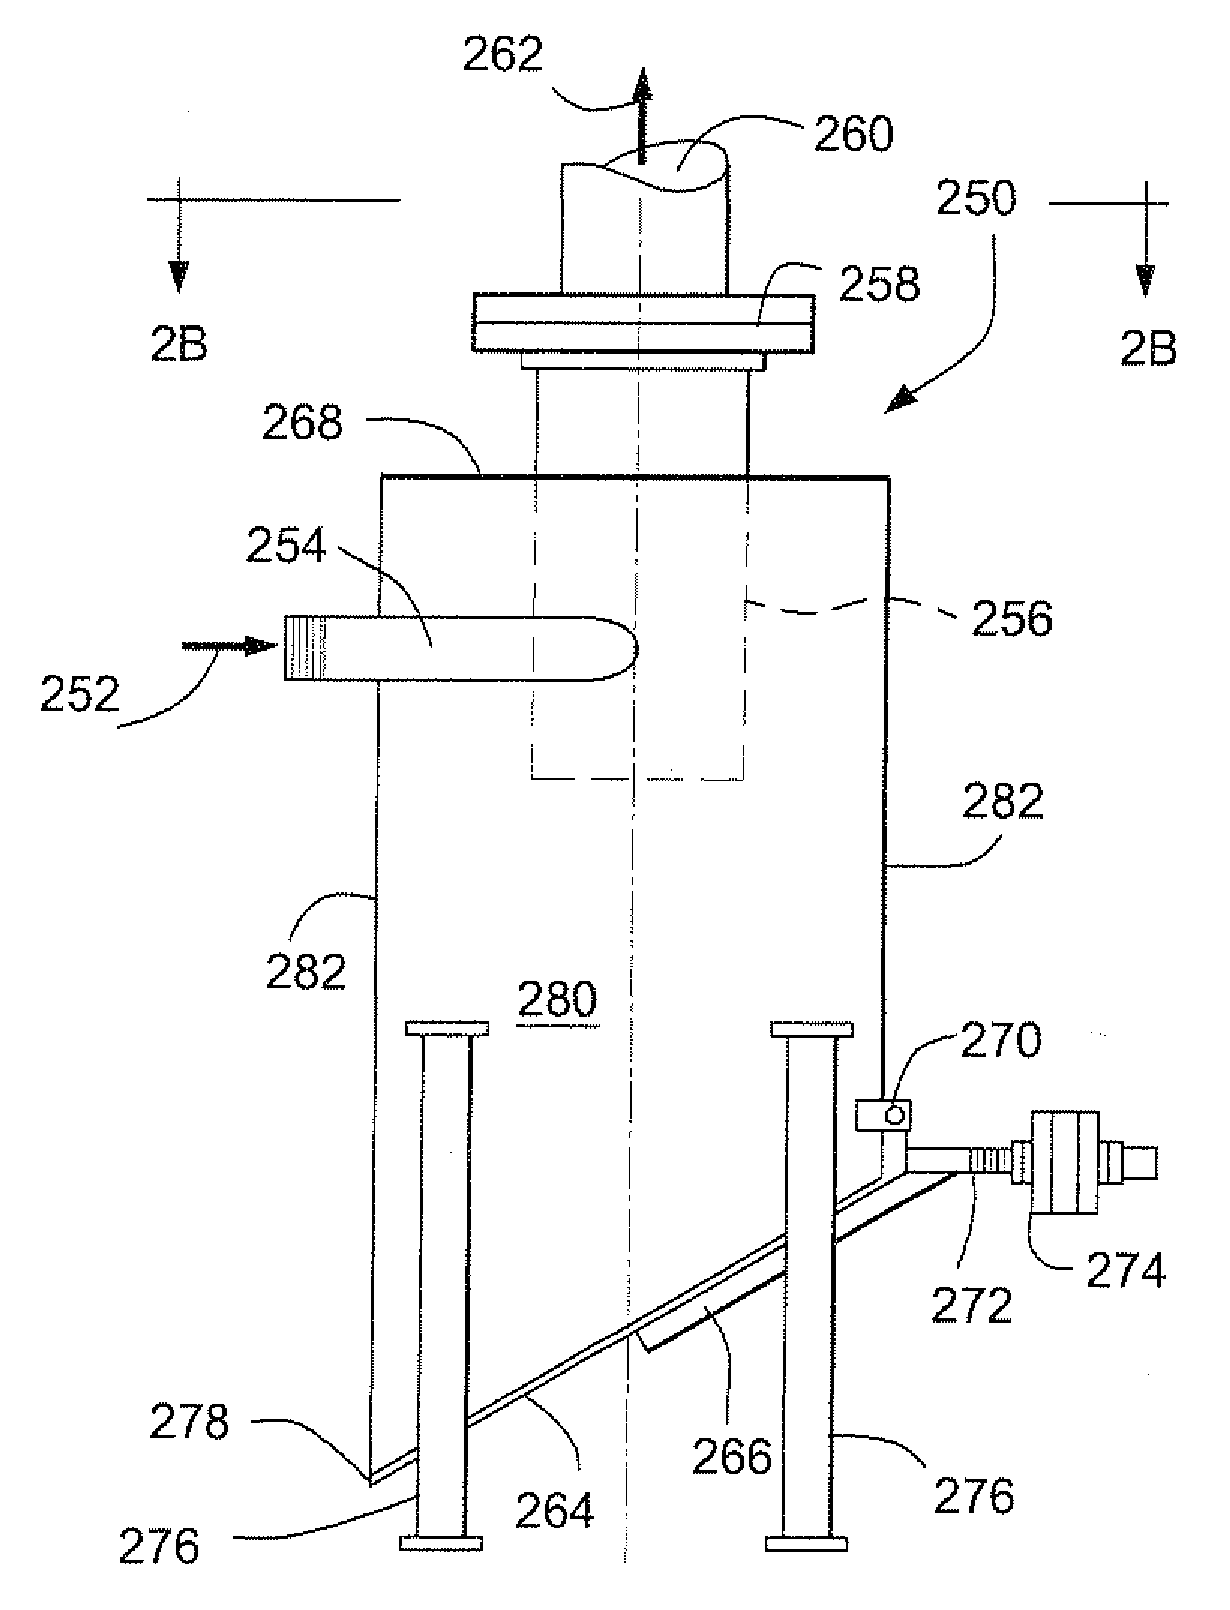 Degassing method and apparatus for separating gas from liquids and possibly solids